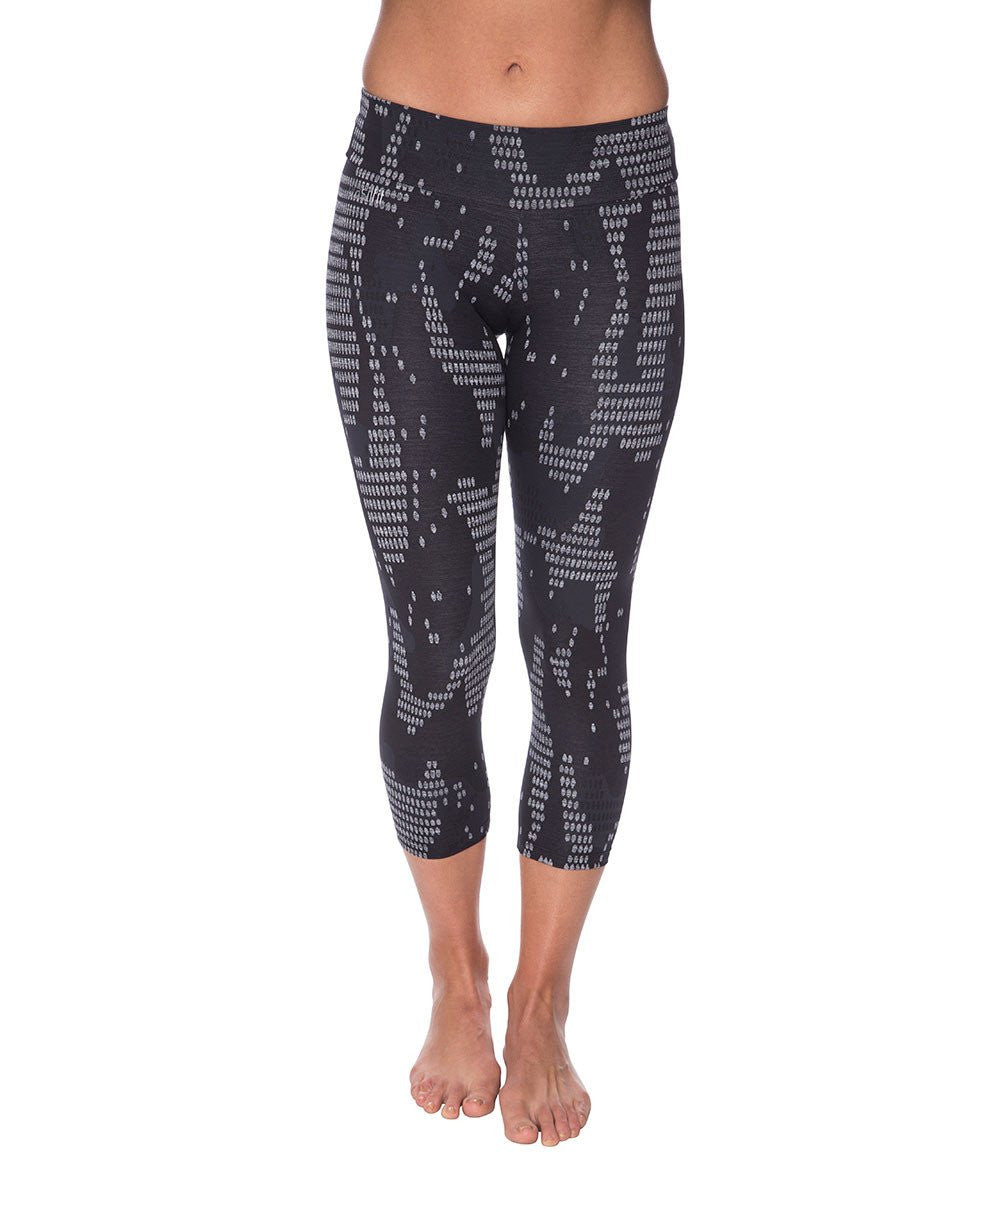 Side view product image for Brasilfit Bangkok Calf Length activewear leggings.  Bangkok leggings are part of our textured activewear legging collection that is focused on performance, high compression activewear.